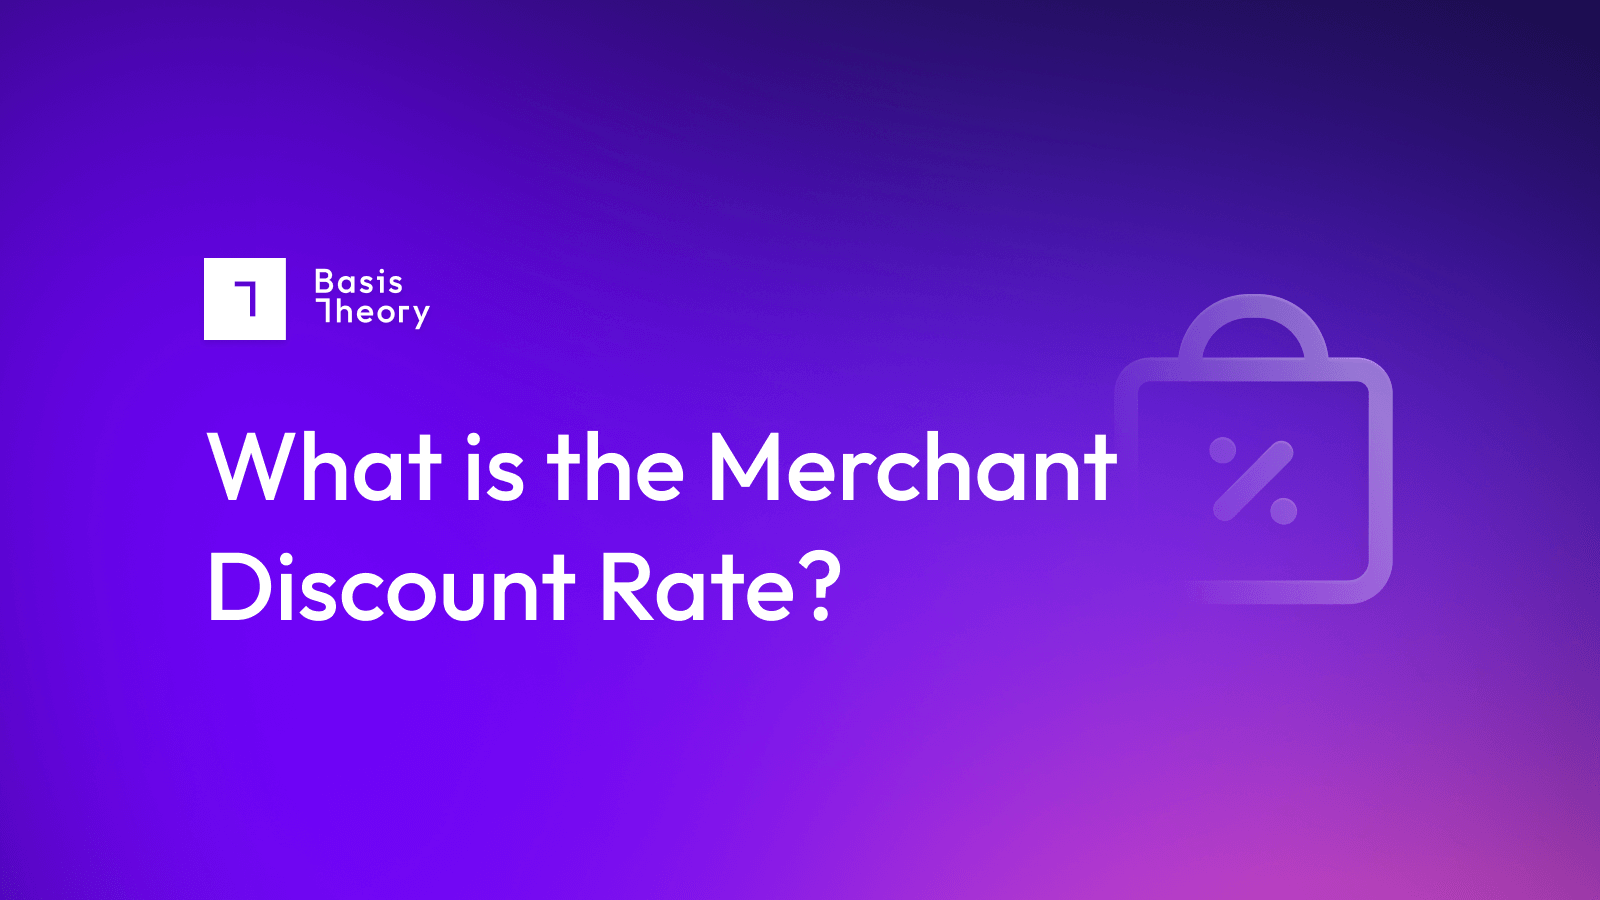 what is the merchant discount rate?